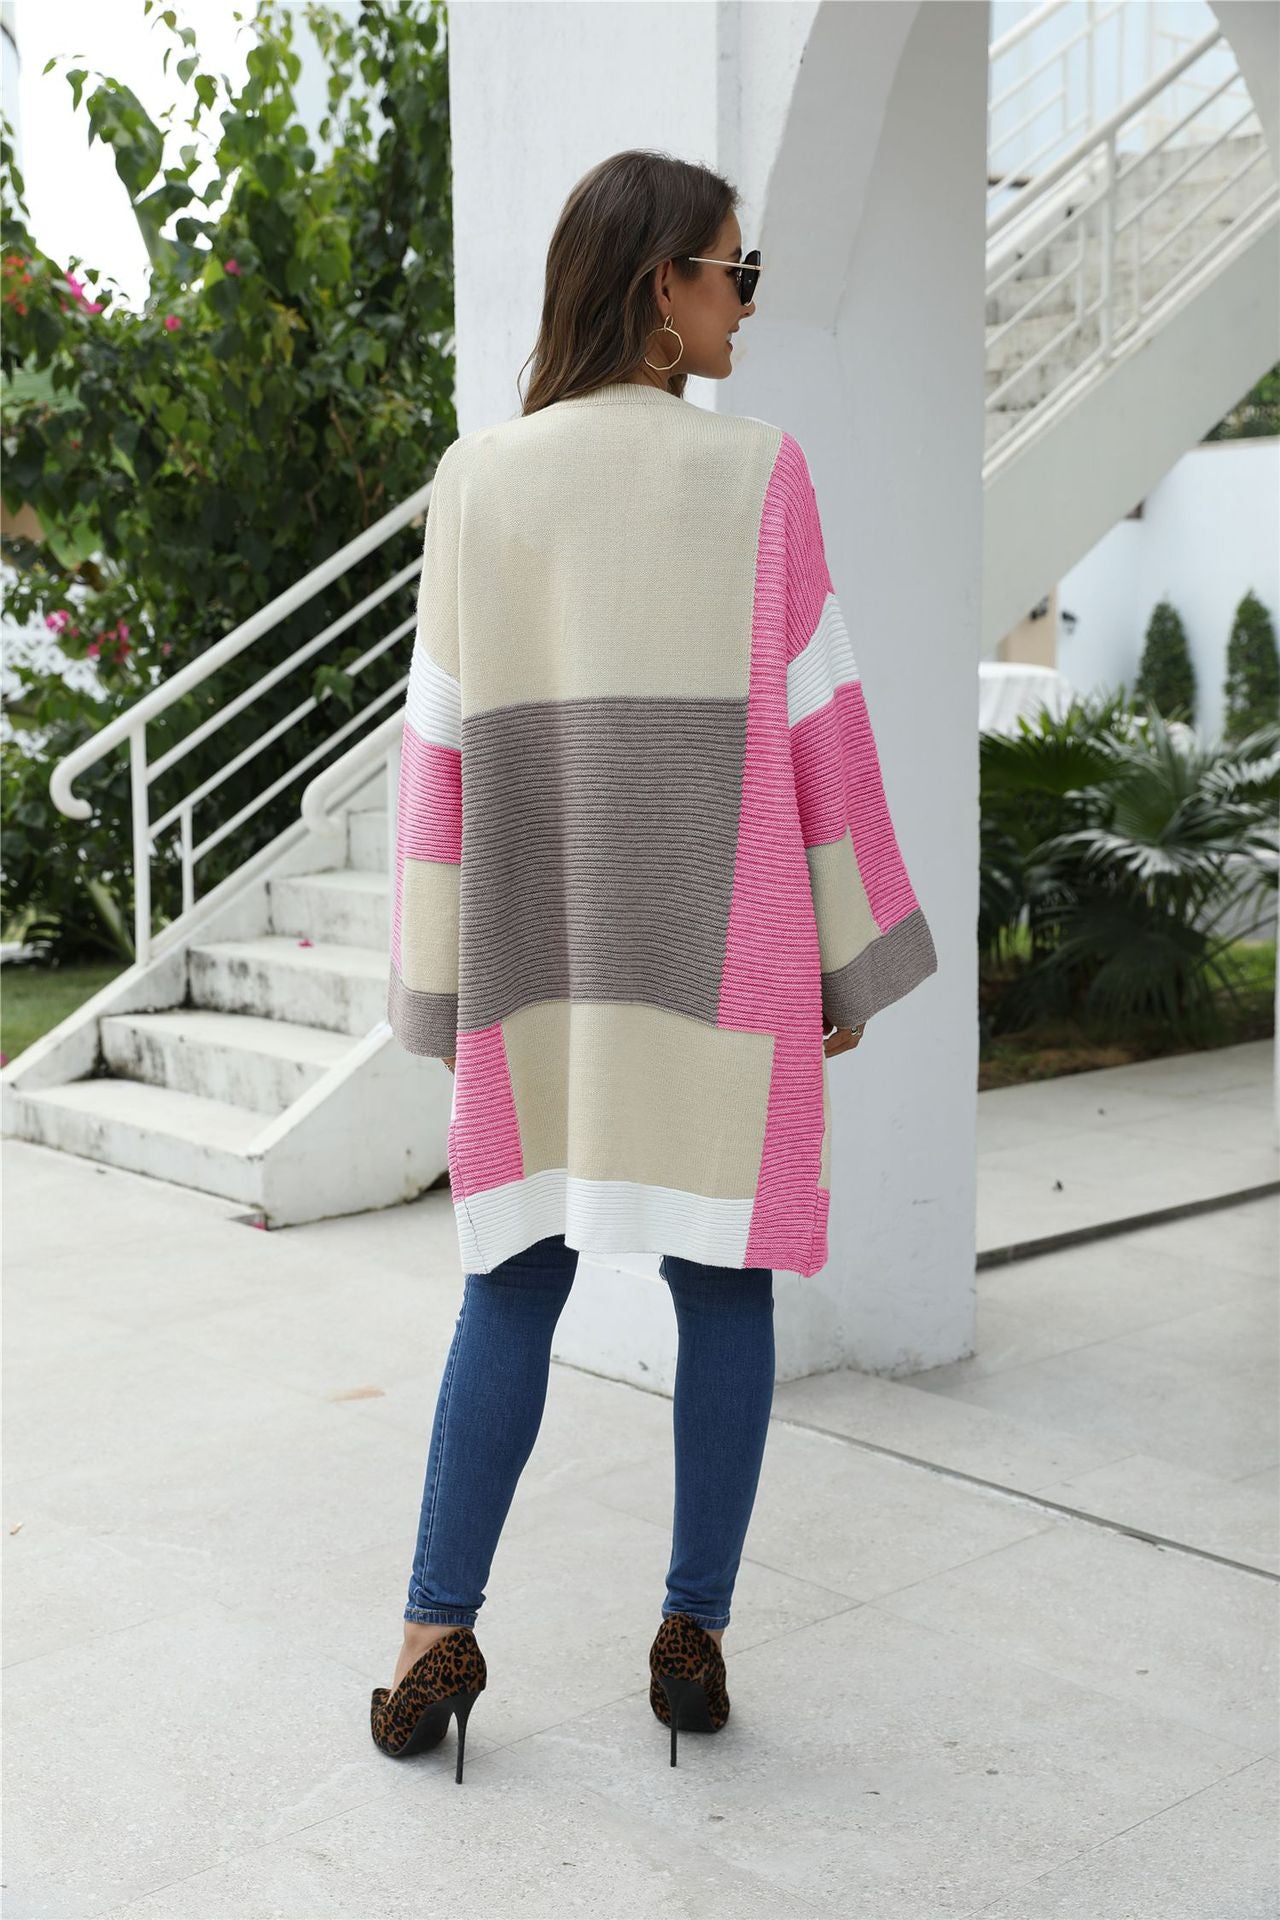 Women Colorful Knitted Cardigan Outerwear